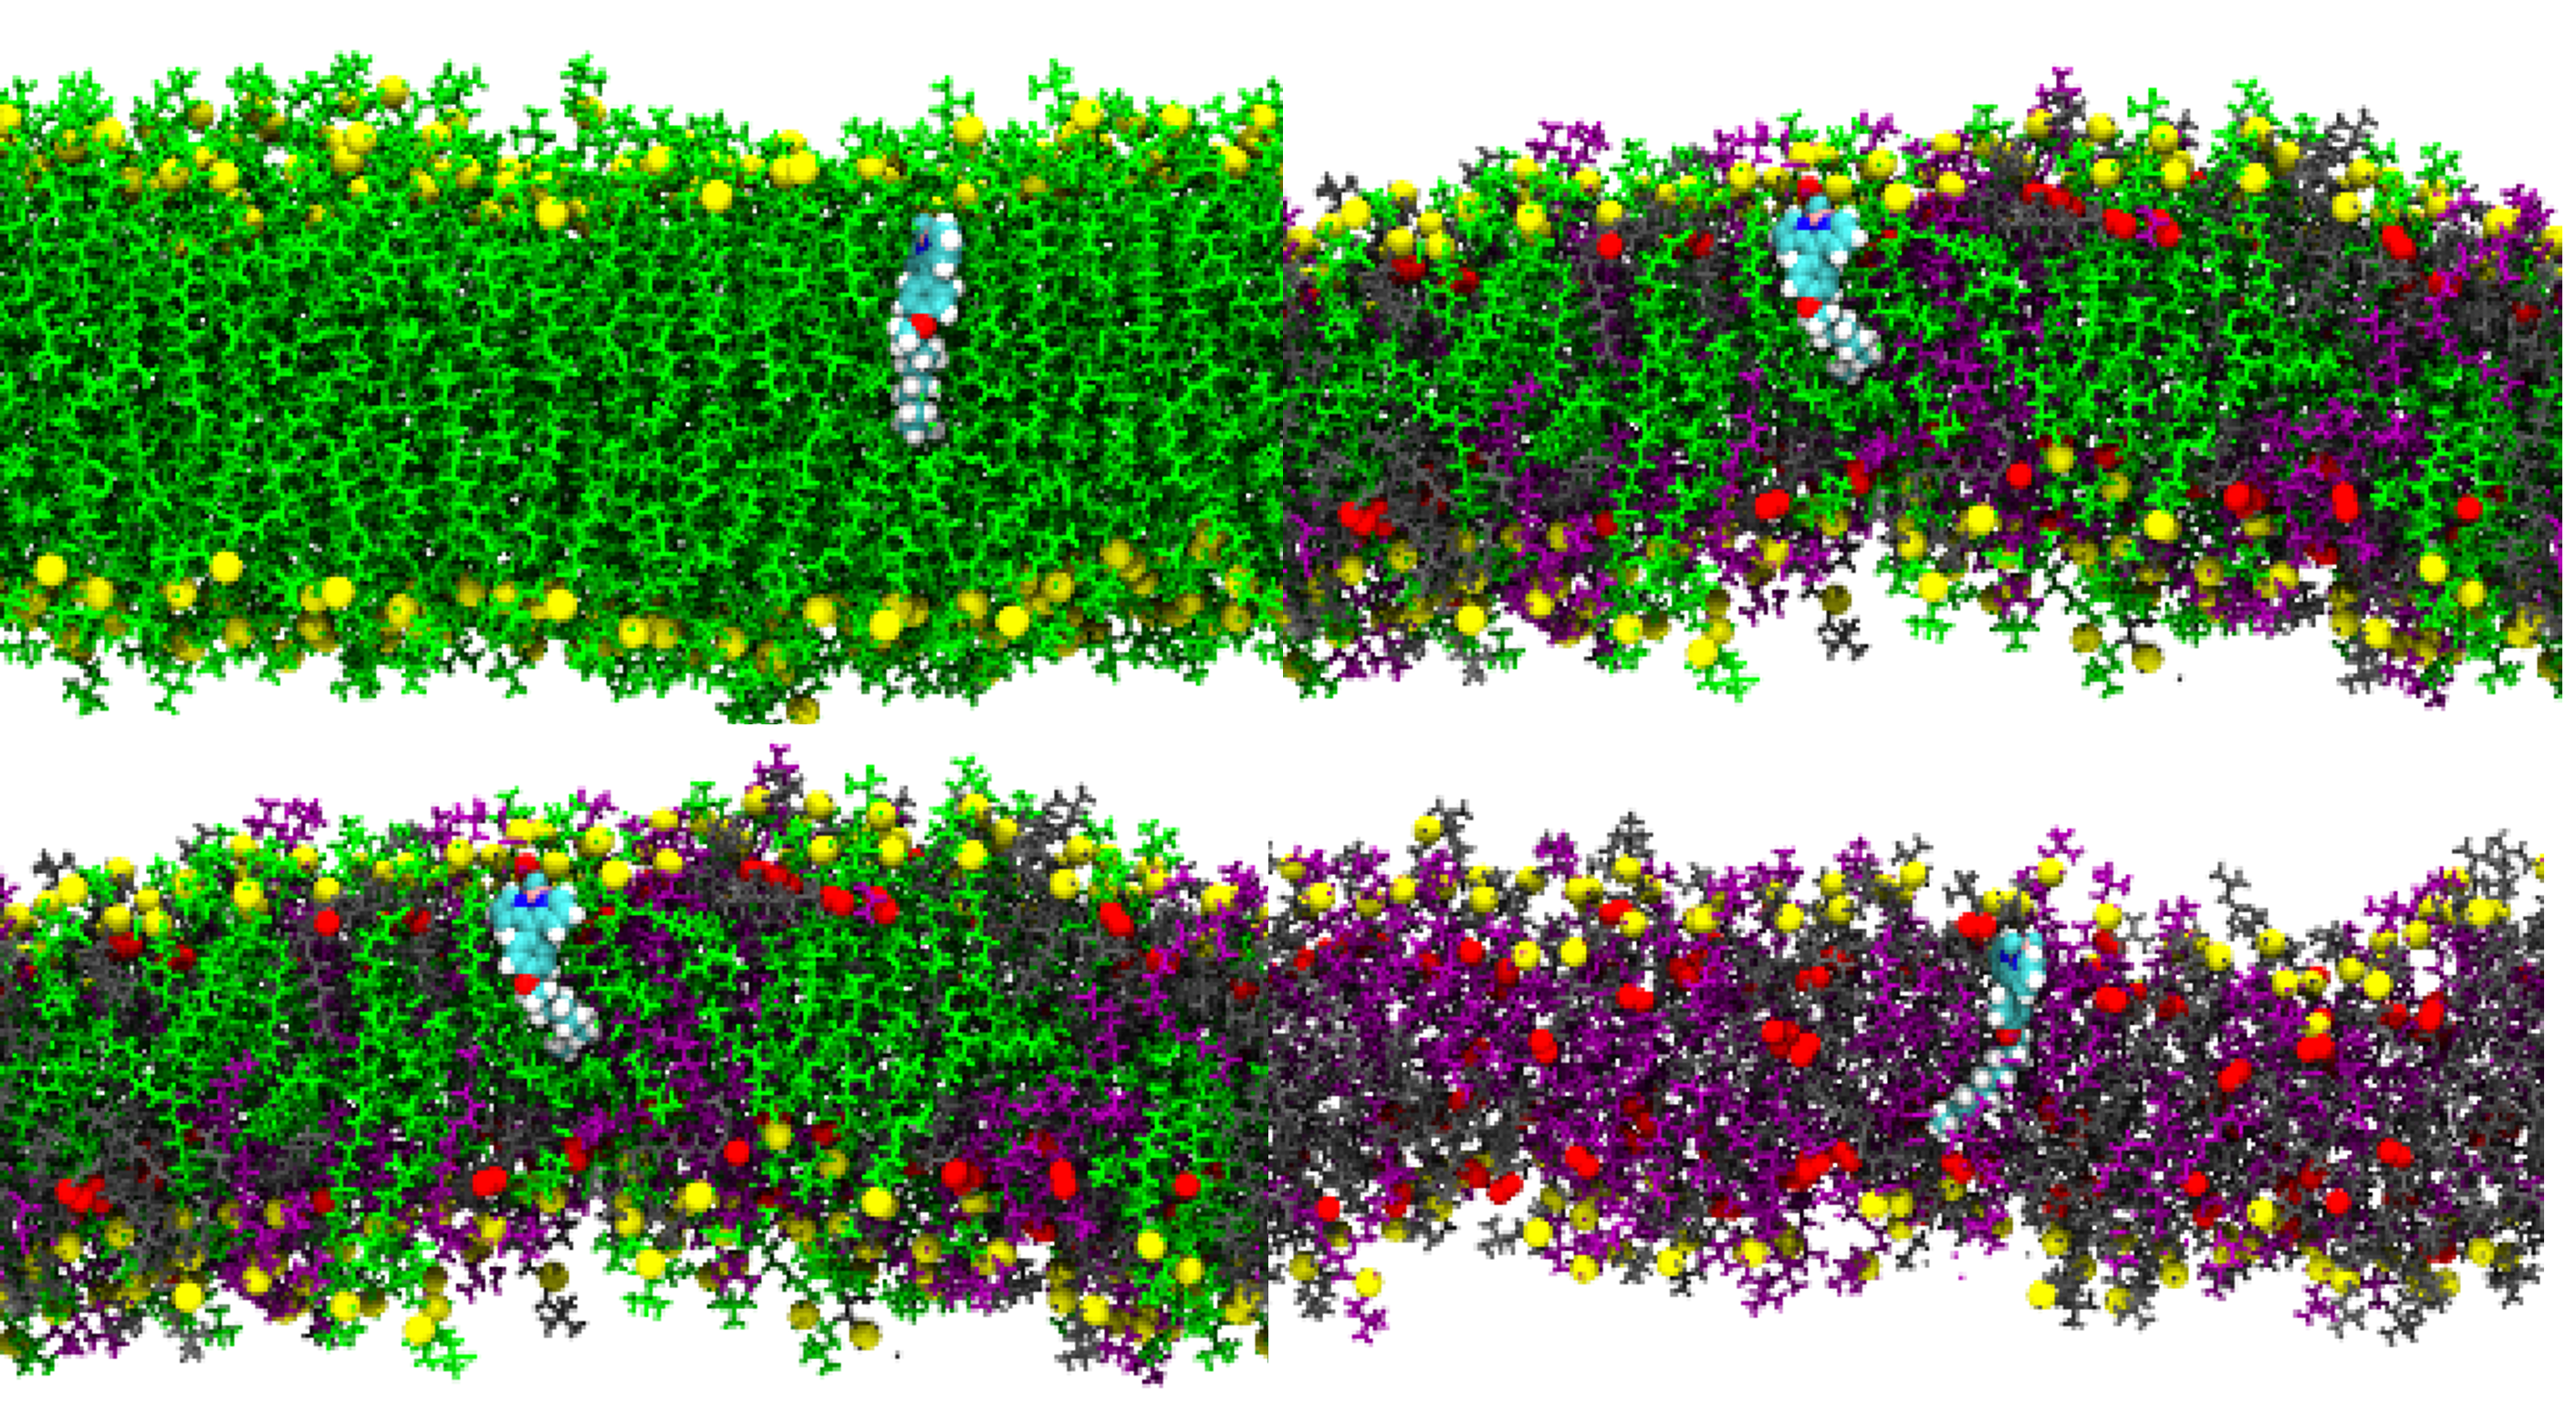 Directly imaging emergence of phase separation in peroxidized lipid membranes